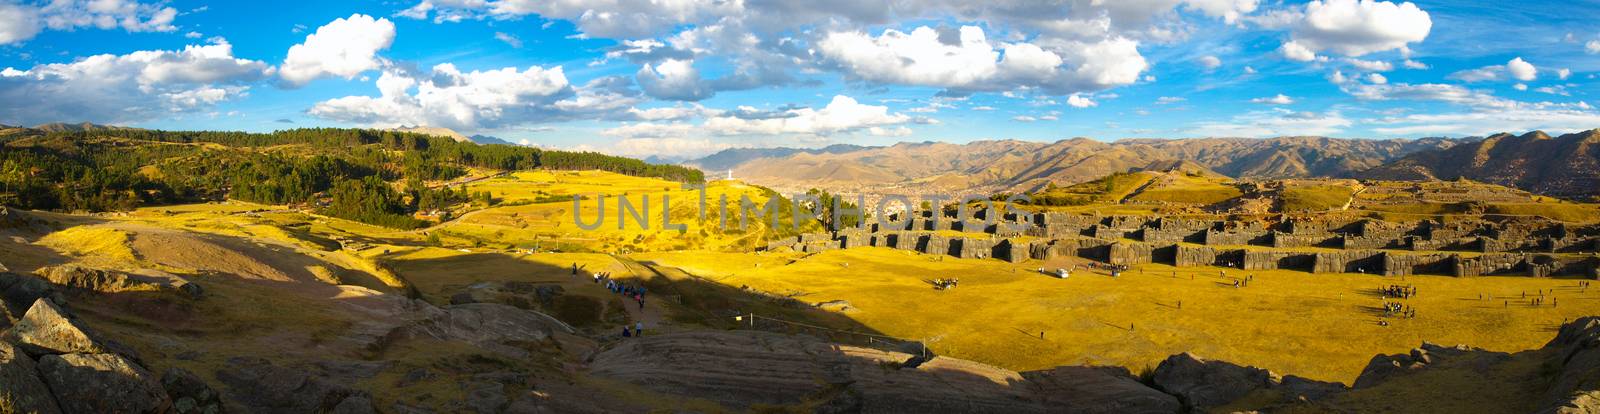 Sacsayhuaman panorama by pyty